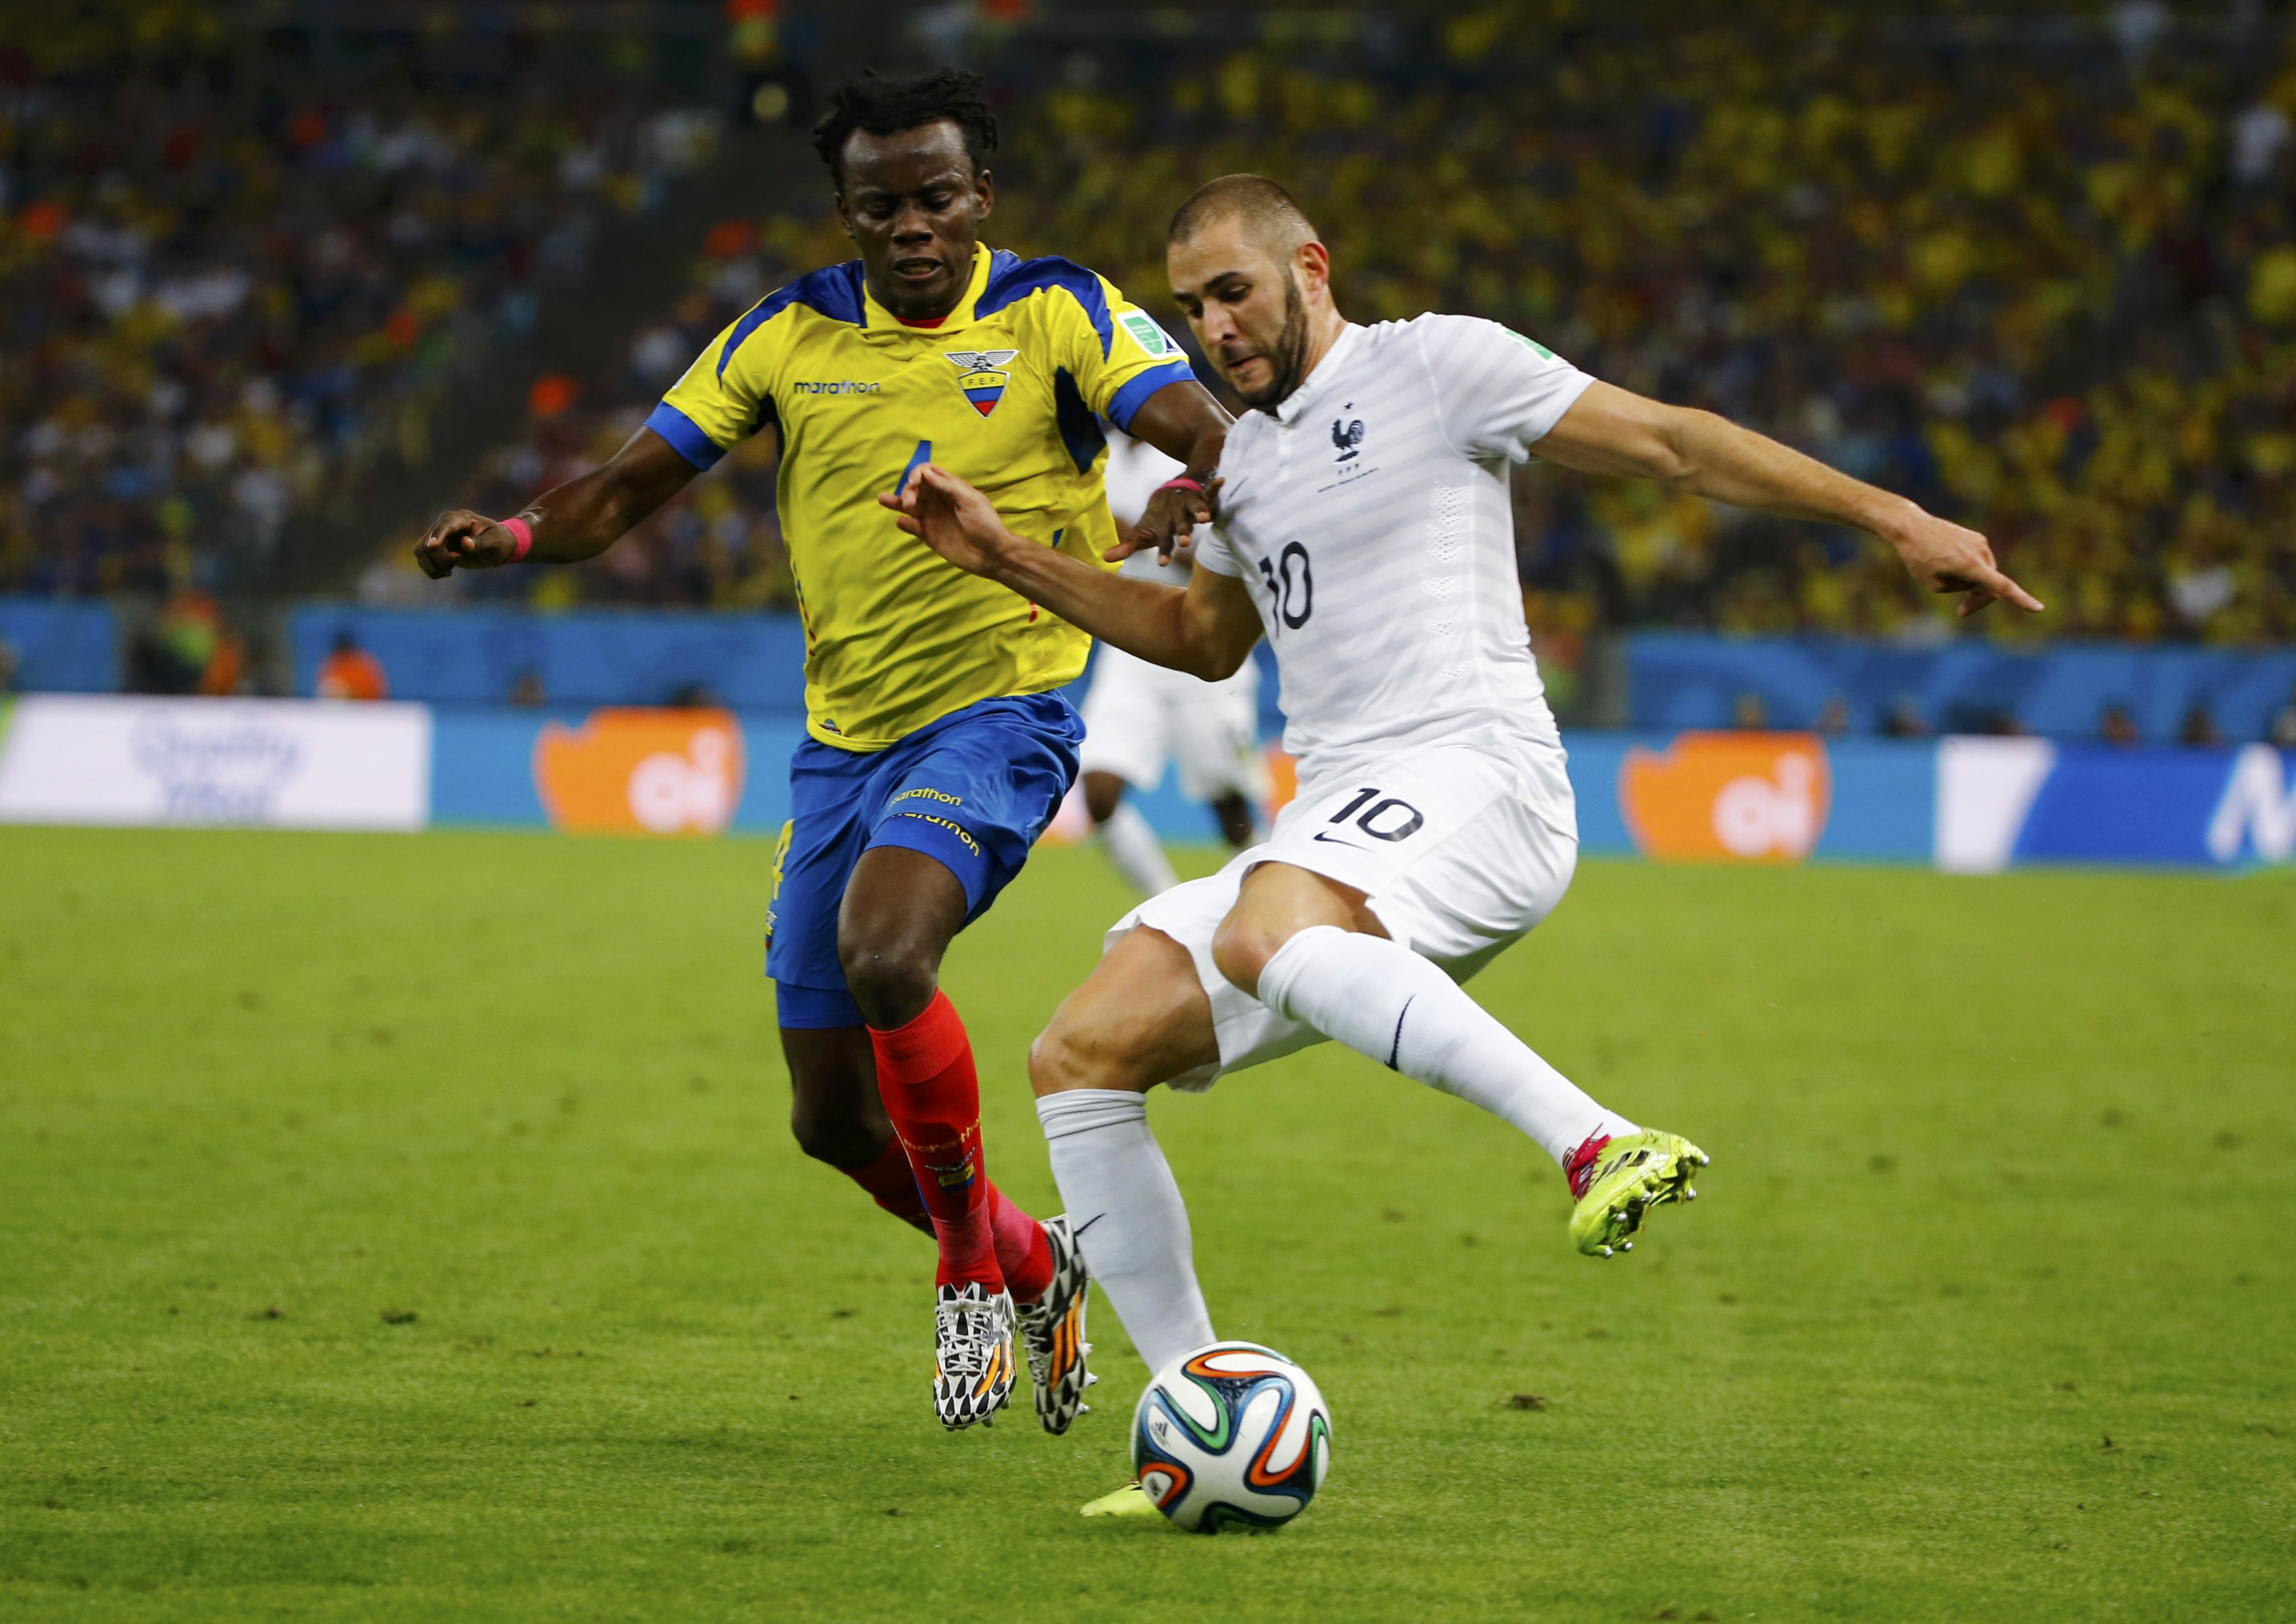 Ecuador's Juan Carlos Paredes (L) fights for the ball with France's Karim Benzema during their 2014 World Cup Group E soccer match at the Maracana stadium in Rio de Janeiro June 25, 2014. REUTERS/Pilar Olivares (BRAZIL  - Tags: SOCCER SPORT WORLD CUP)  